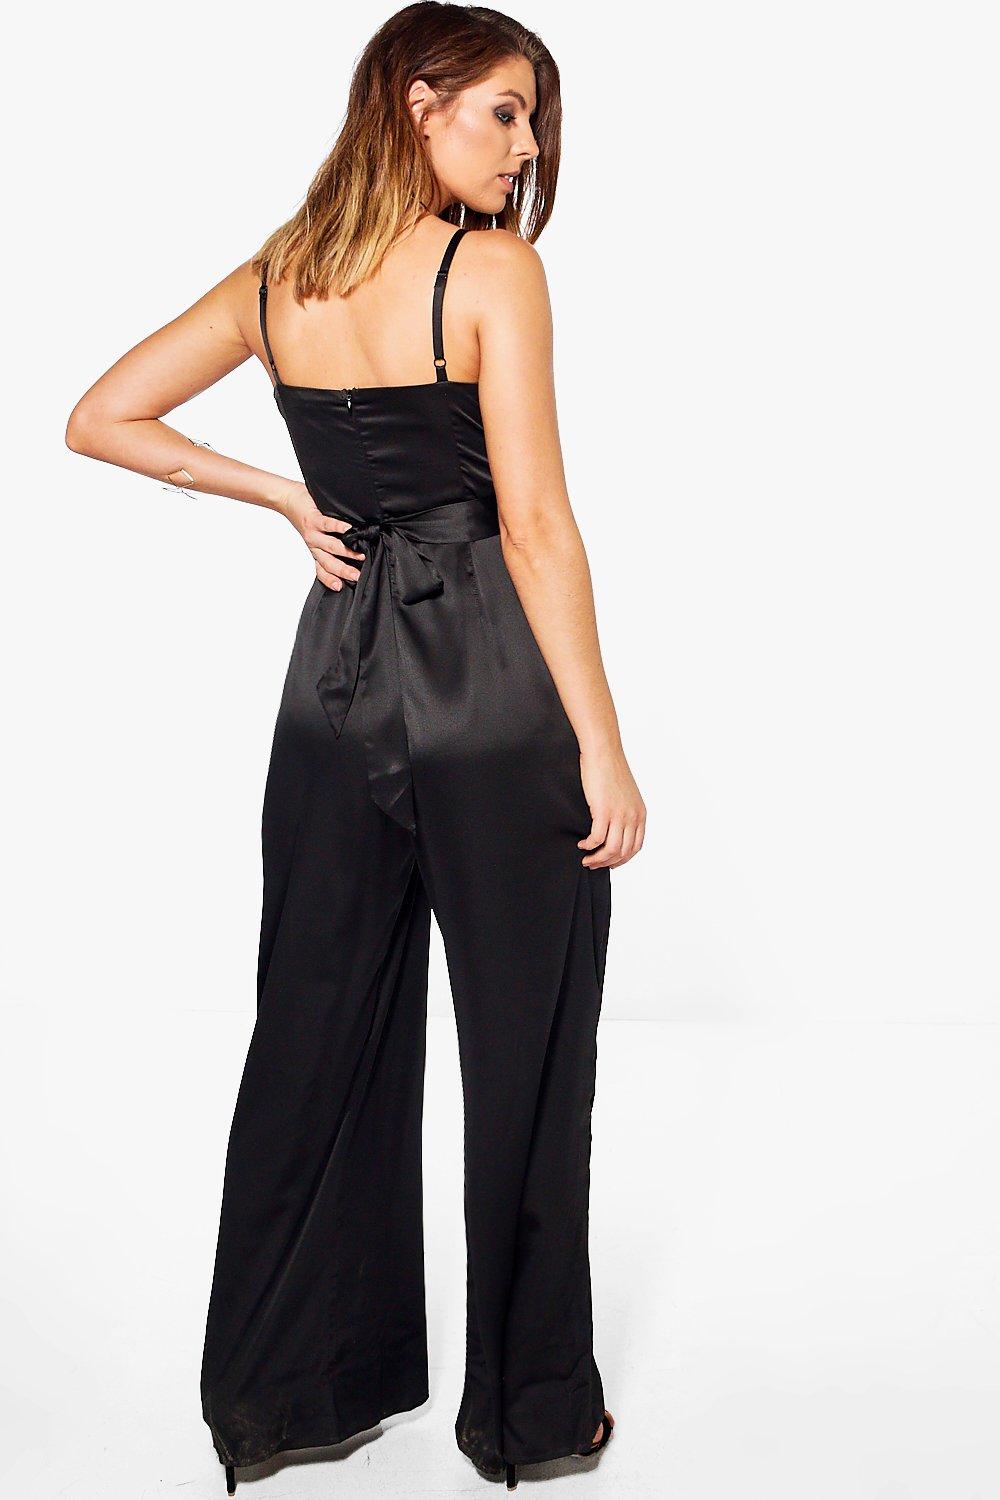 Boohoo Womens Lucy Wrap Front Strappy Satin Jumpsuit | eBay